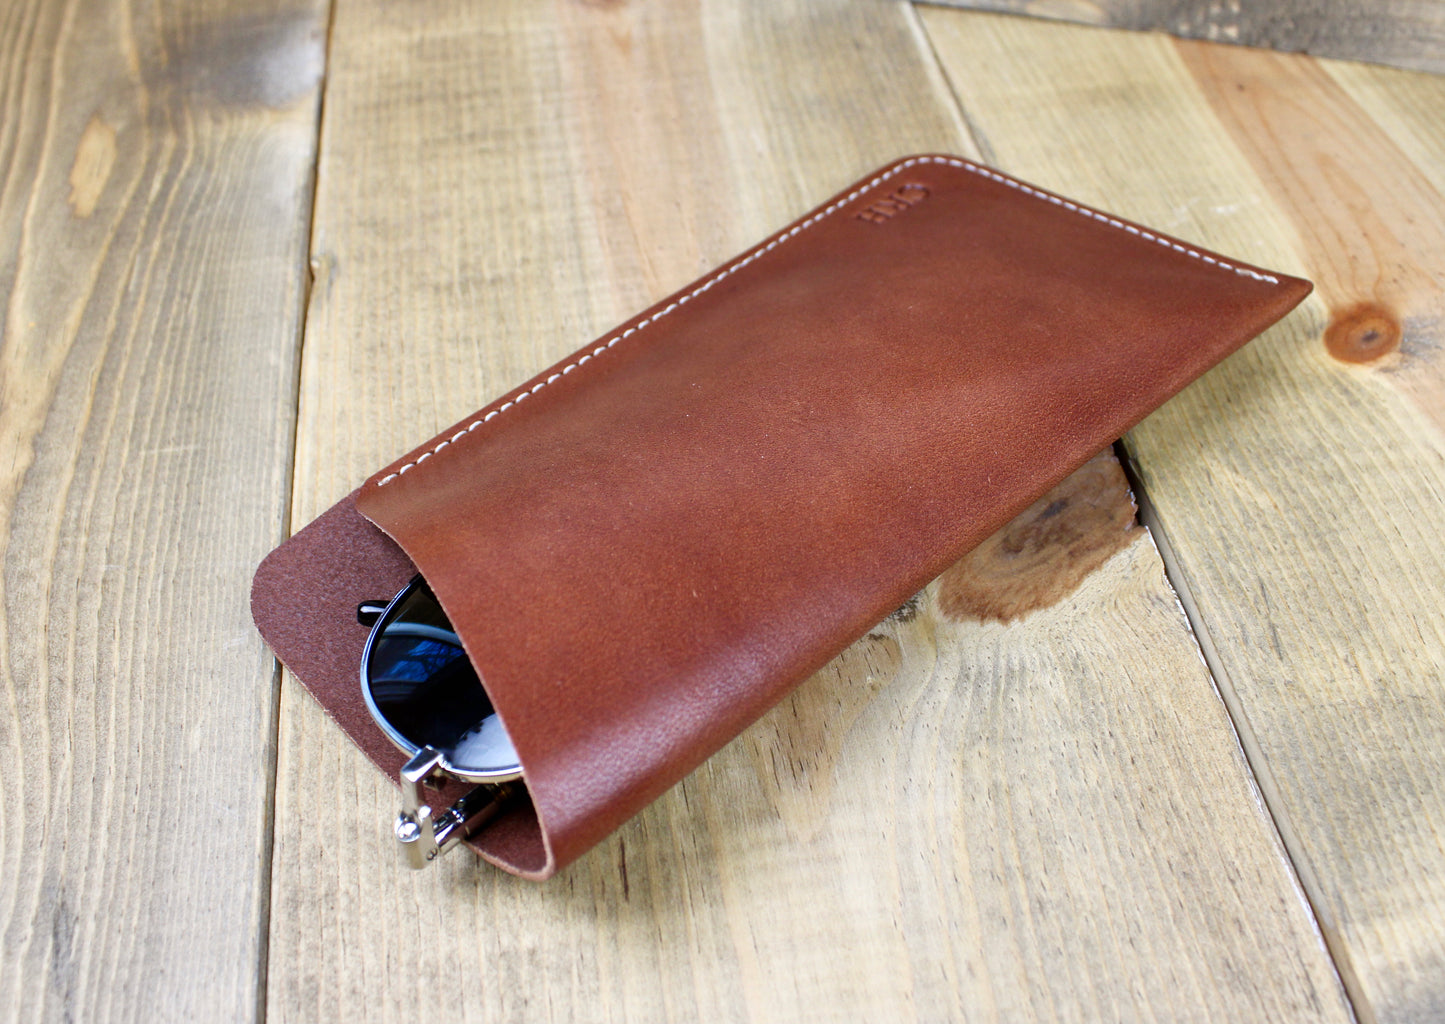 handmade leather glasses sleeve with personalization. leather glasses case for men or women. 3rd anniversary gift for men